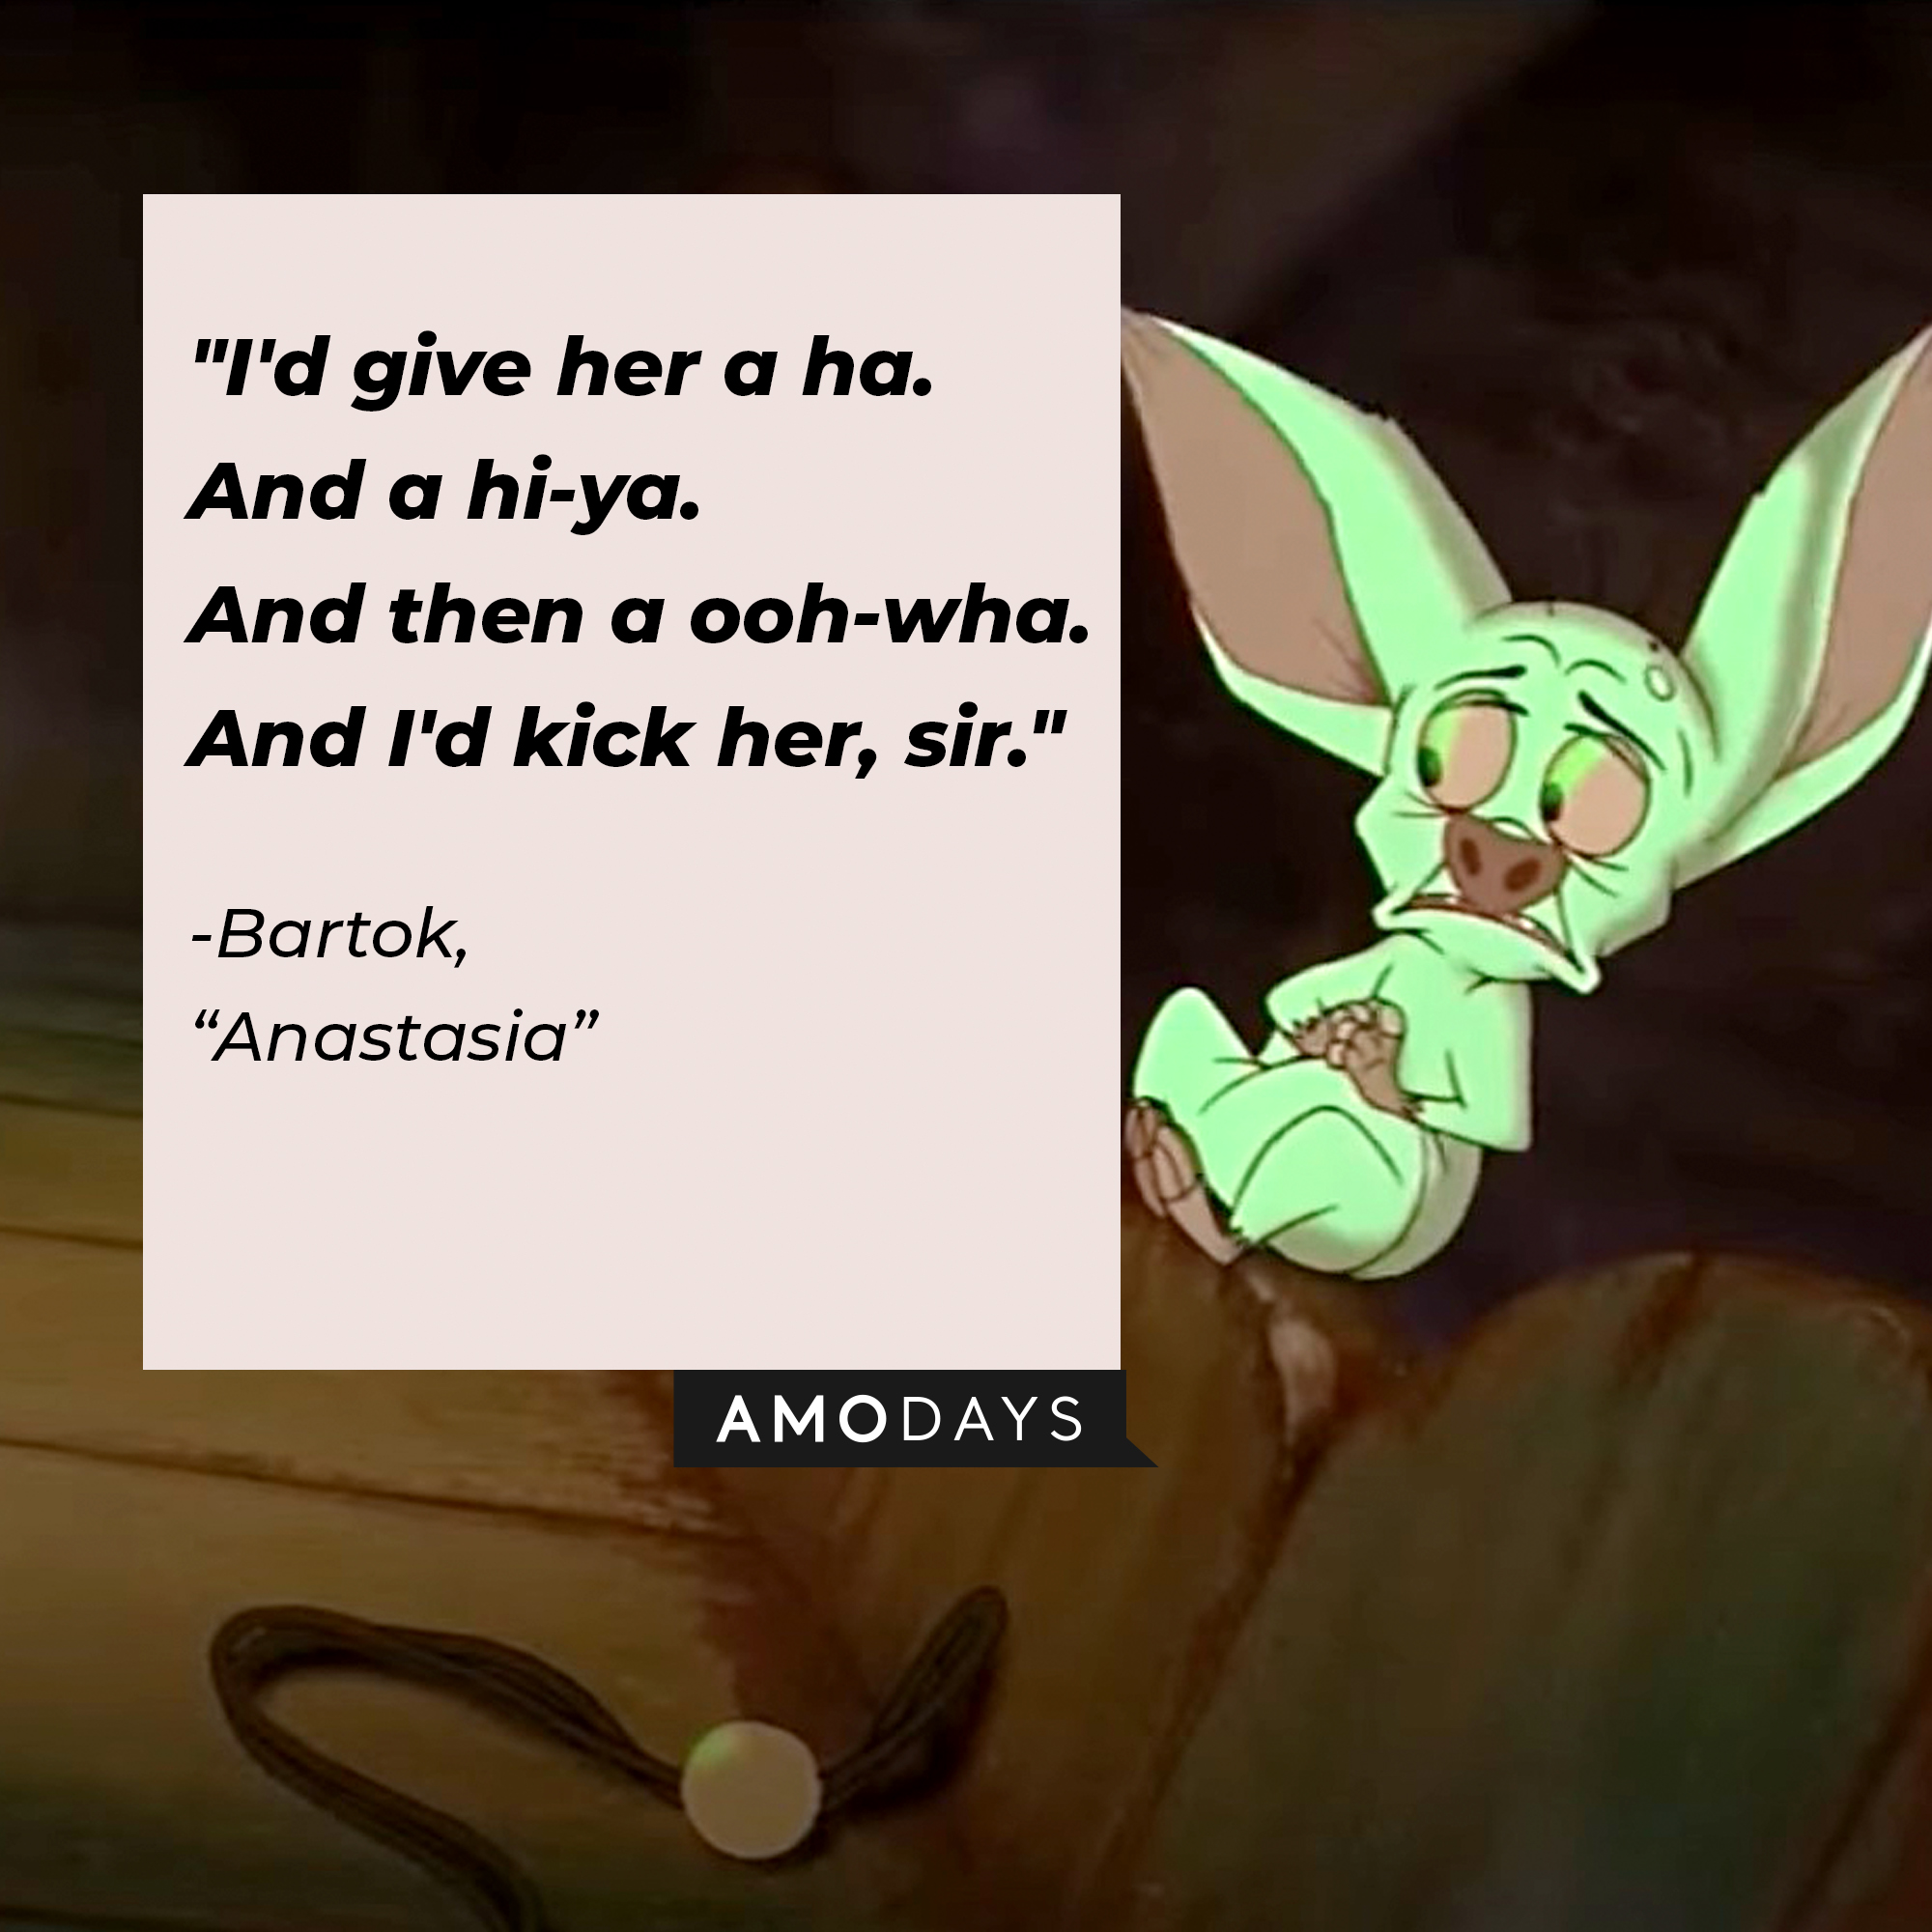 Image of Bartok with the quote: "I'd give her a ha. And a hi-ya. And then a ooh-wha. And I'd kick her, sir." | Source: Youtube.com/20thCenturyStudios